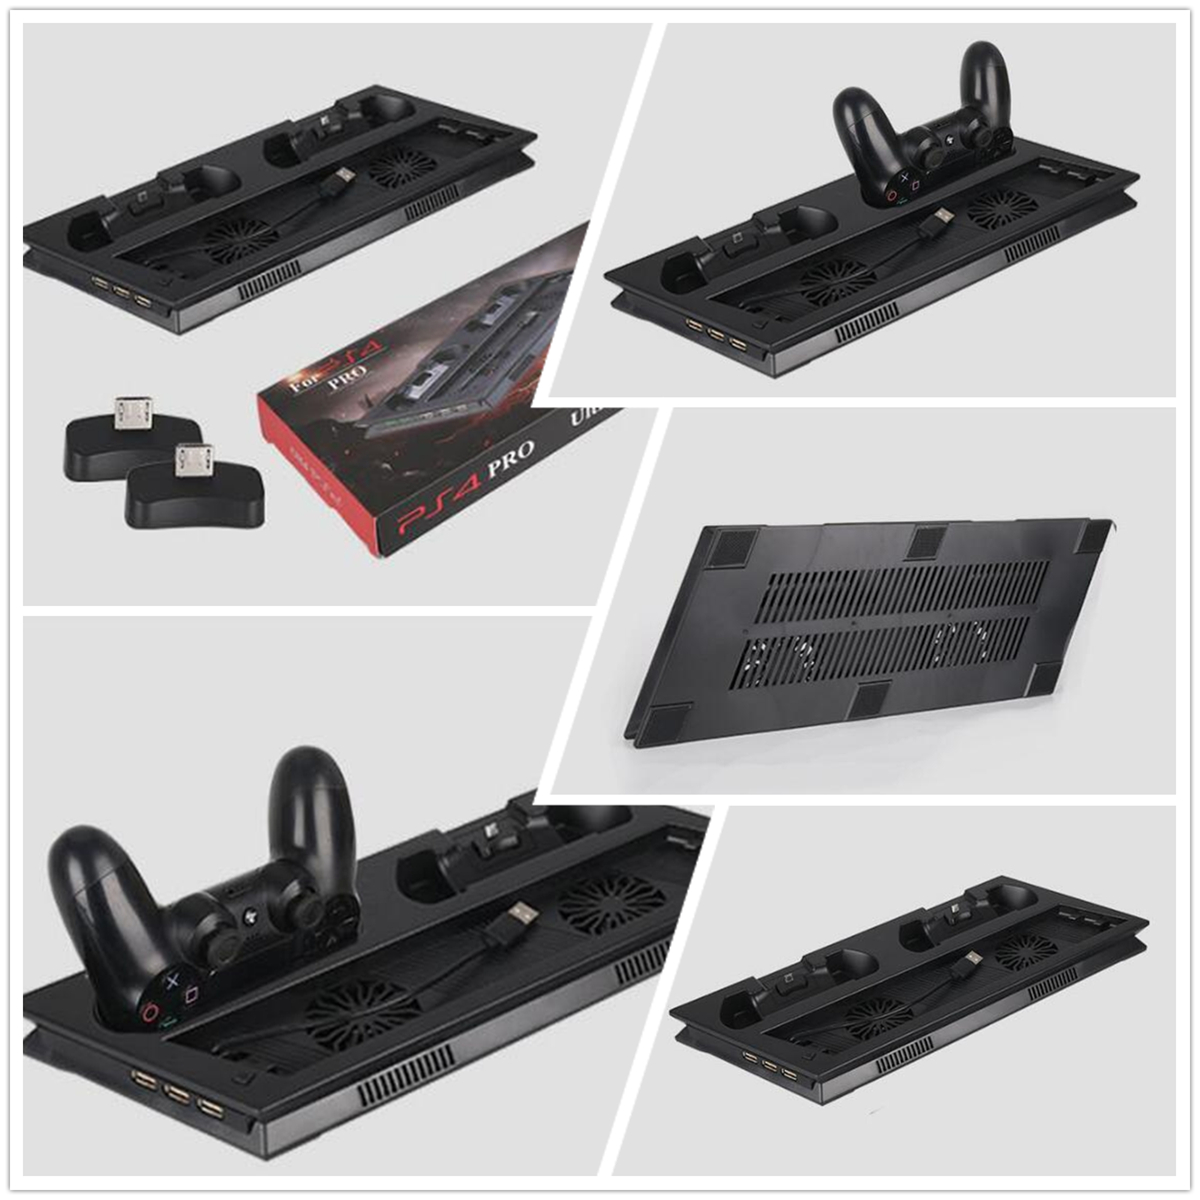 LED Charger Station Stand Charging Dock Cooling Fan for Sony Playstation 4 PS4 PRO Slim Game Console Gamepad 83